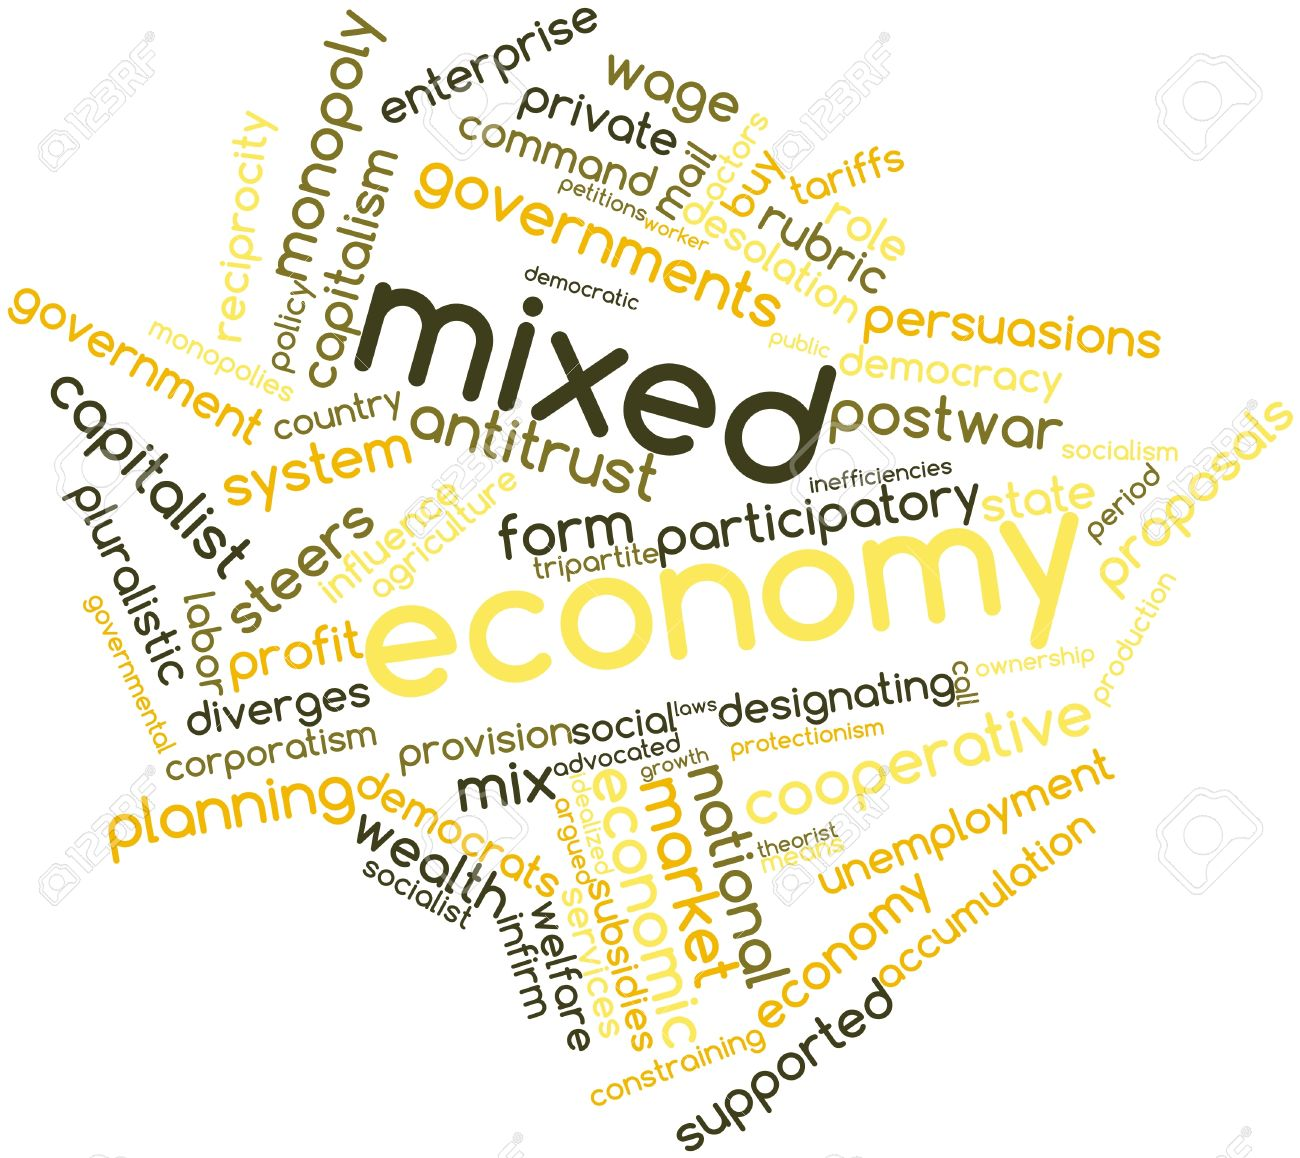 Mixed Economy PNG - 79120